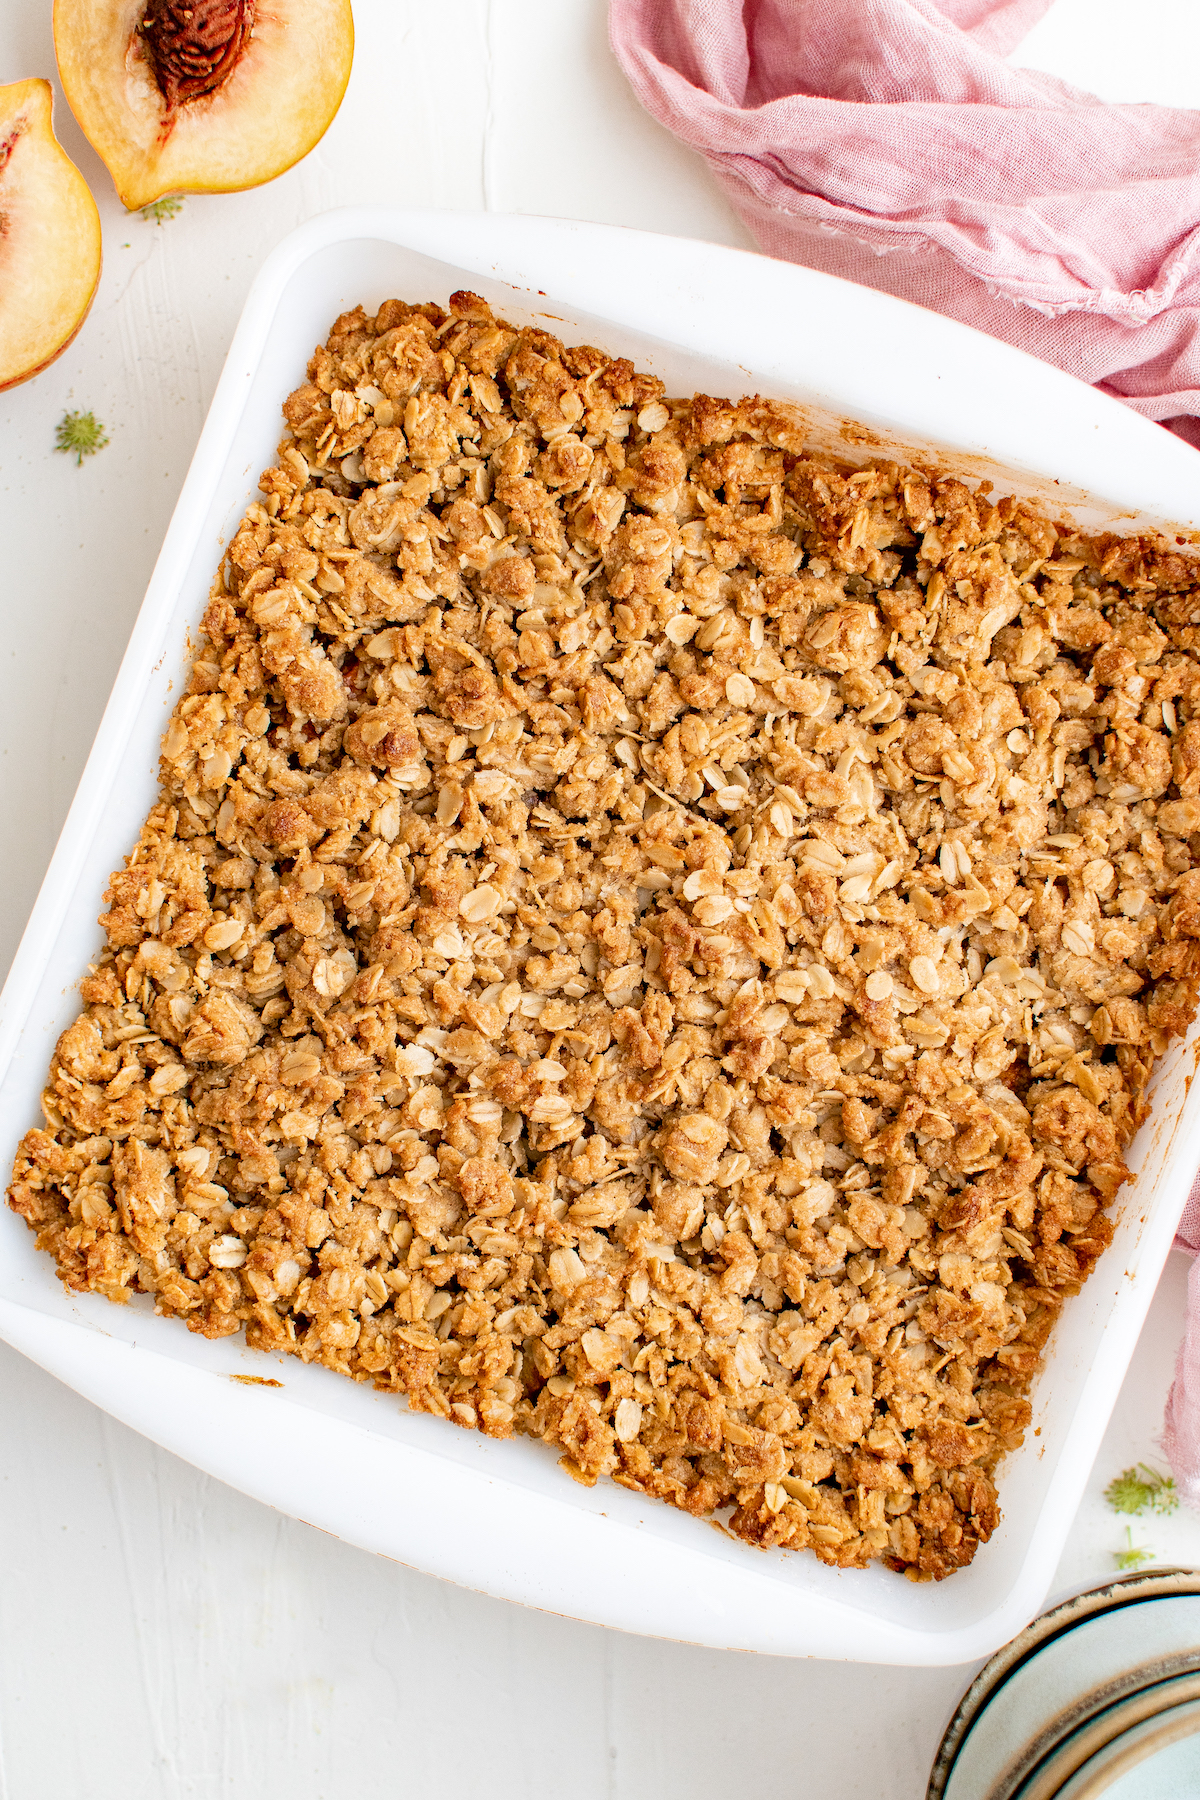 A square white baking dish with a baked oat topping visible from above.